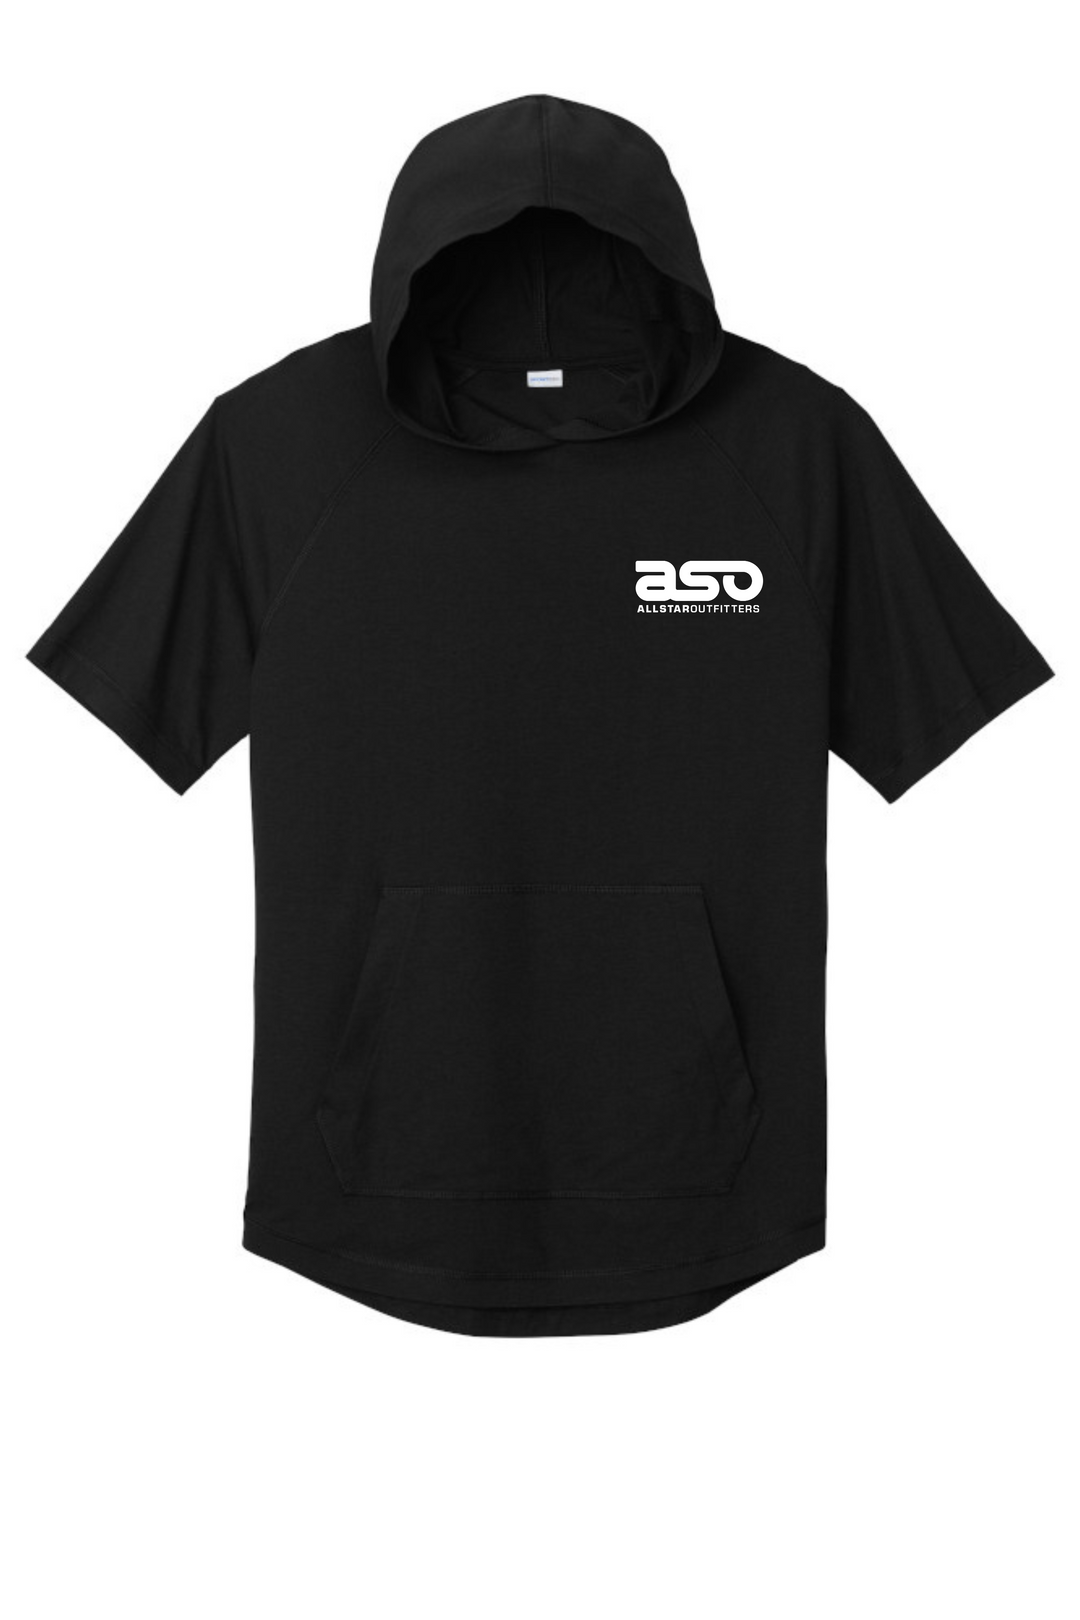 ASO Manager Hooded S/S Tee